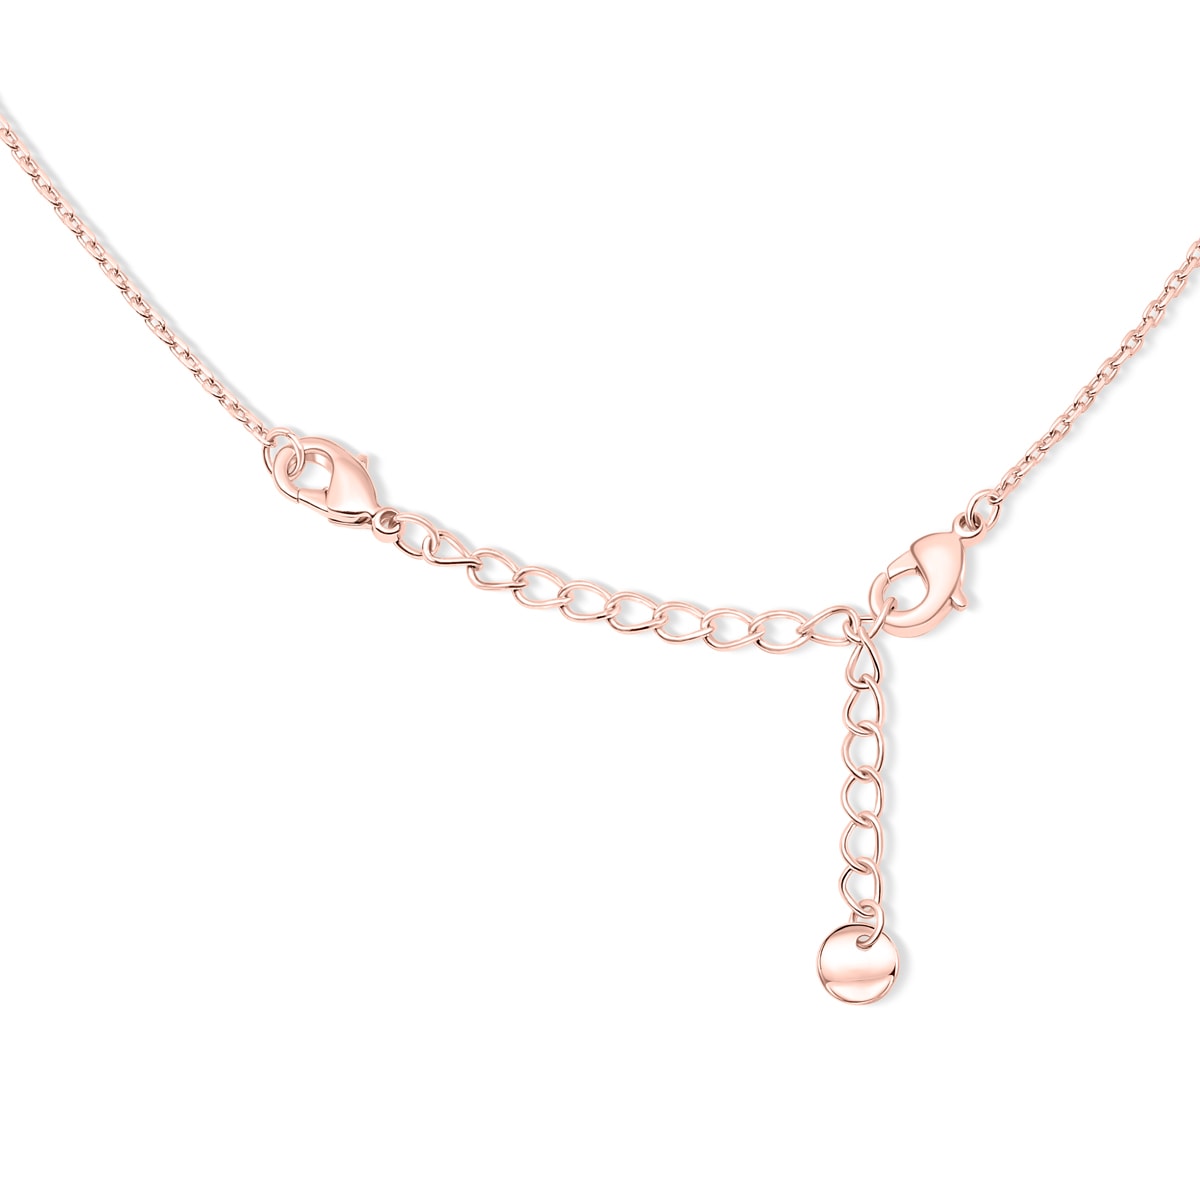 Modern Gents Trading Co Women's Affinity Necklace